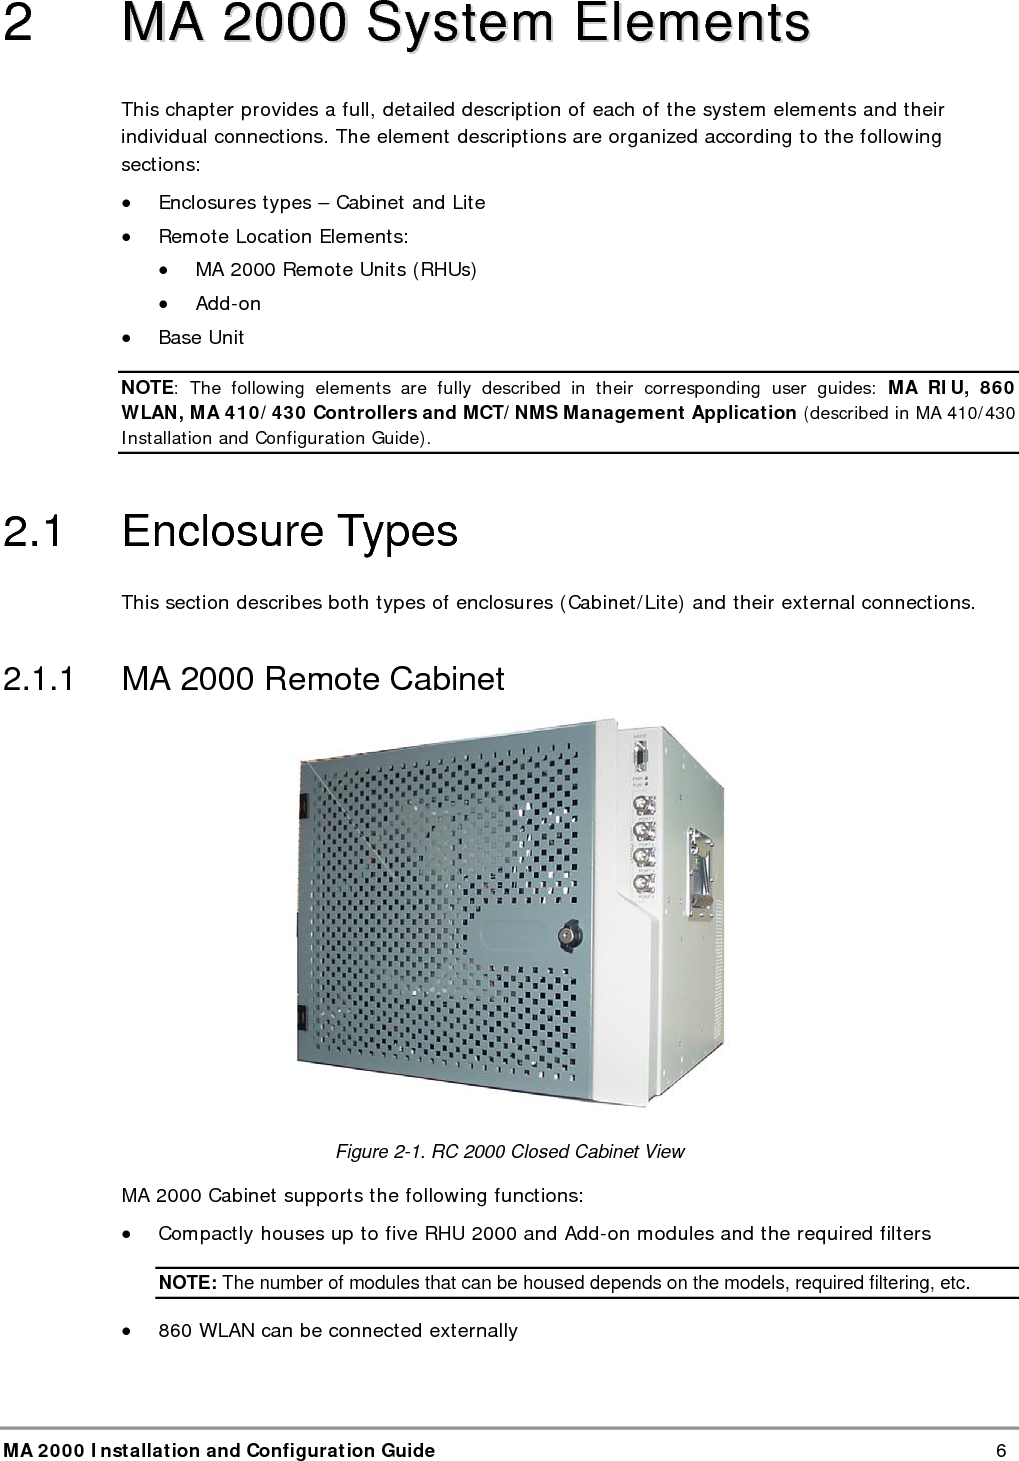  MA 2000 Installation and Configuration Guide    6 2   MMAA  22000000  SSyysstteemm  EElleemmeennttss  This chapter provides a full, detailed description of each of the system elements and their individual connections. The element descriptions are organized according to the following sections: • Enclosures types – Cabinet and Lite  • Remote Location Elements: • MA 2000 Remote Units (RHUs) • Add-on • Base Unit NOTE: The following elements are fully described in their corresponding user guides: MA RIU, 860 WLAN, MA 410/430 Controllers and MCT/NMS Management Application (described in MA 410/430 Installation and Configuration Guide). 2.1 Enclosure Types This section describes both types of enclosures (Cabinet/Lite) and their external connections.  2.1.1  MA 2000 Remote Cabinet  Figure  2-1. RC 2000 Closed Cabinet View MA 2000 Cabinet supports the following functions: • Compactly houses up to five RHU 2000 and Add-on modules and the required filters NOTE: The number of modules that can be housed depends on the models, required filtering, etc. • 860 WLAN can be connected externally 